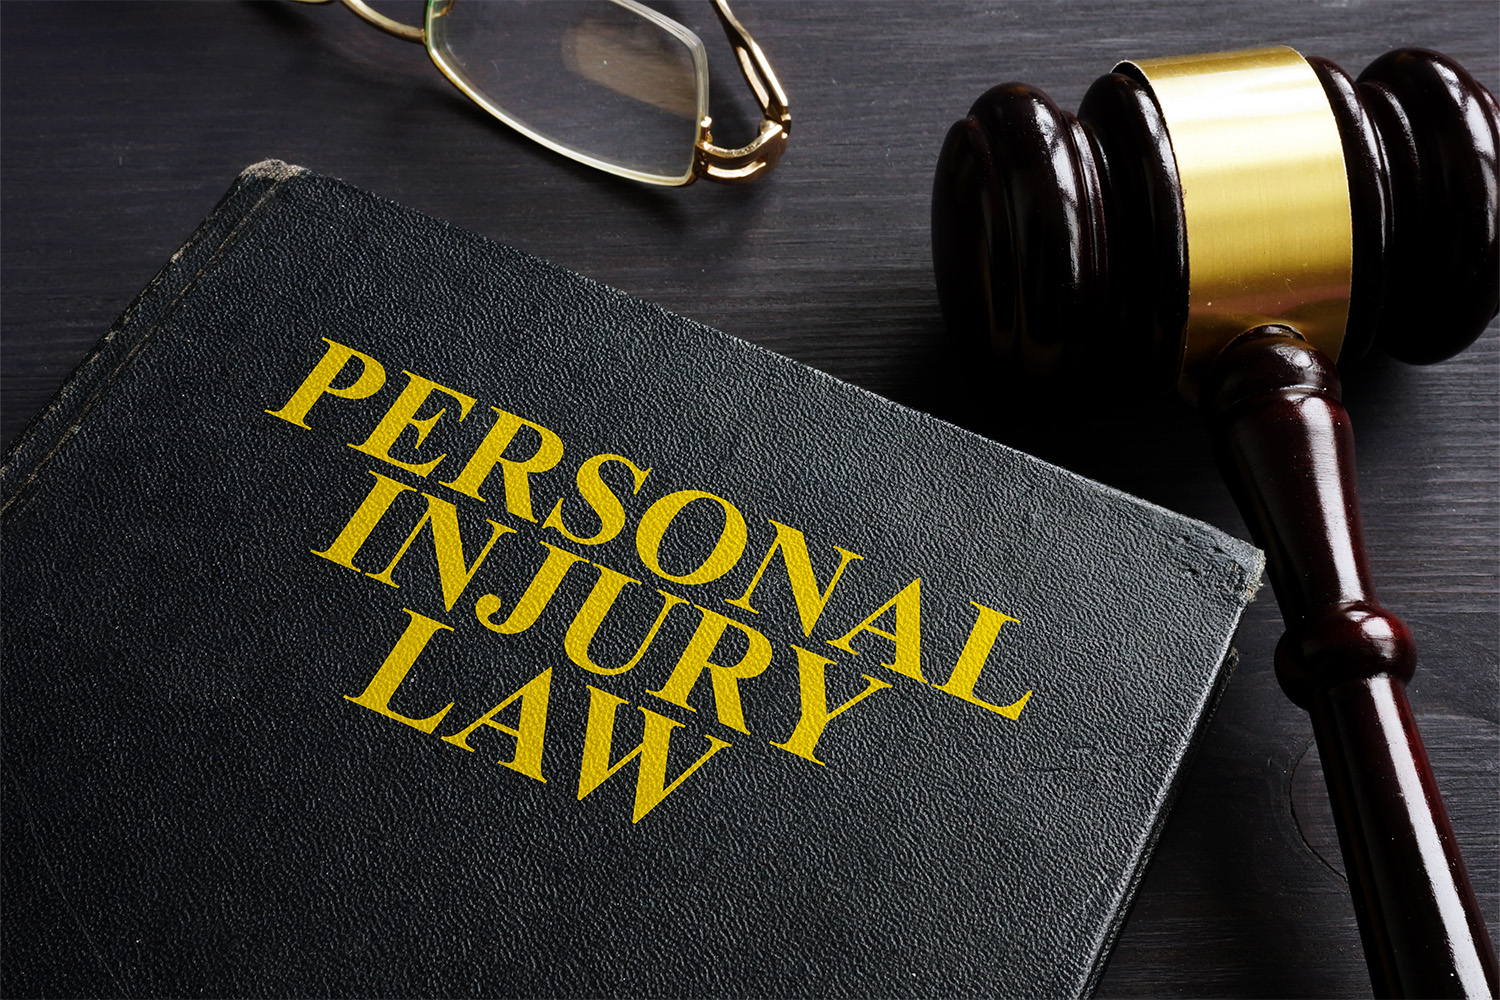 Chances of Winning a Personal Injury Lawsuit